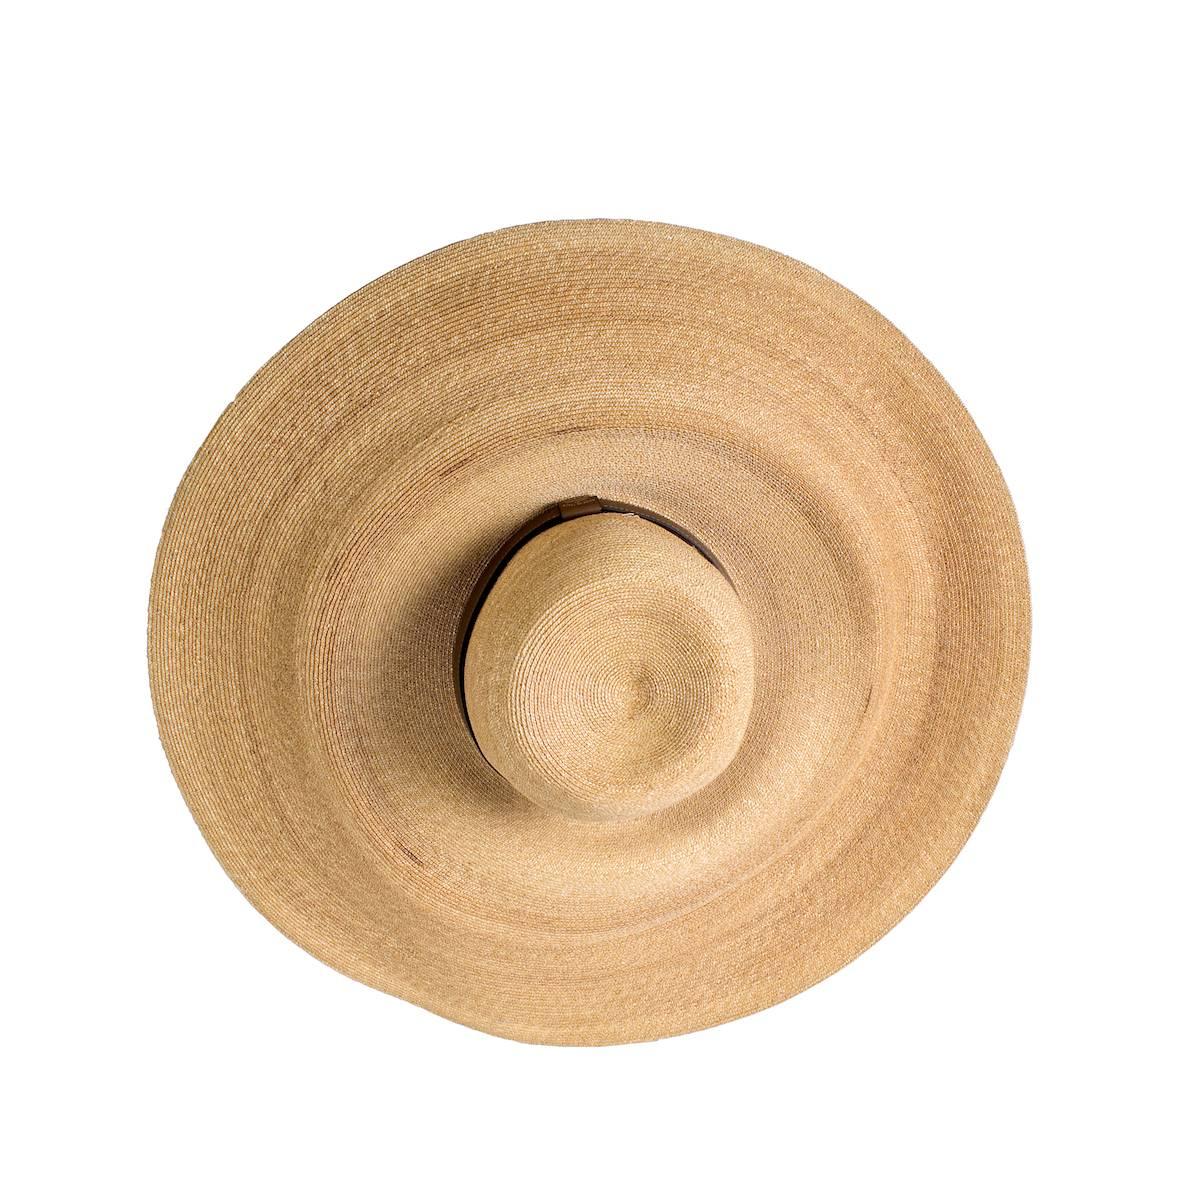 Wheat straw floppy sun hat from Gucci.  Features brown leather band with Gucci logo.

Approximately 20.5